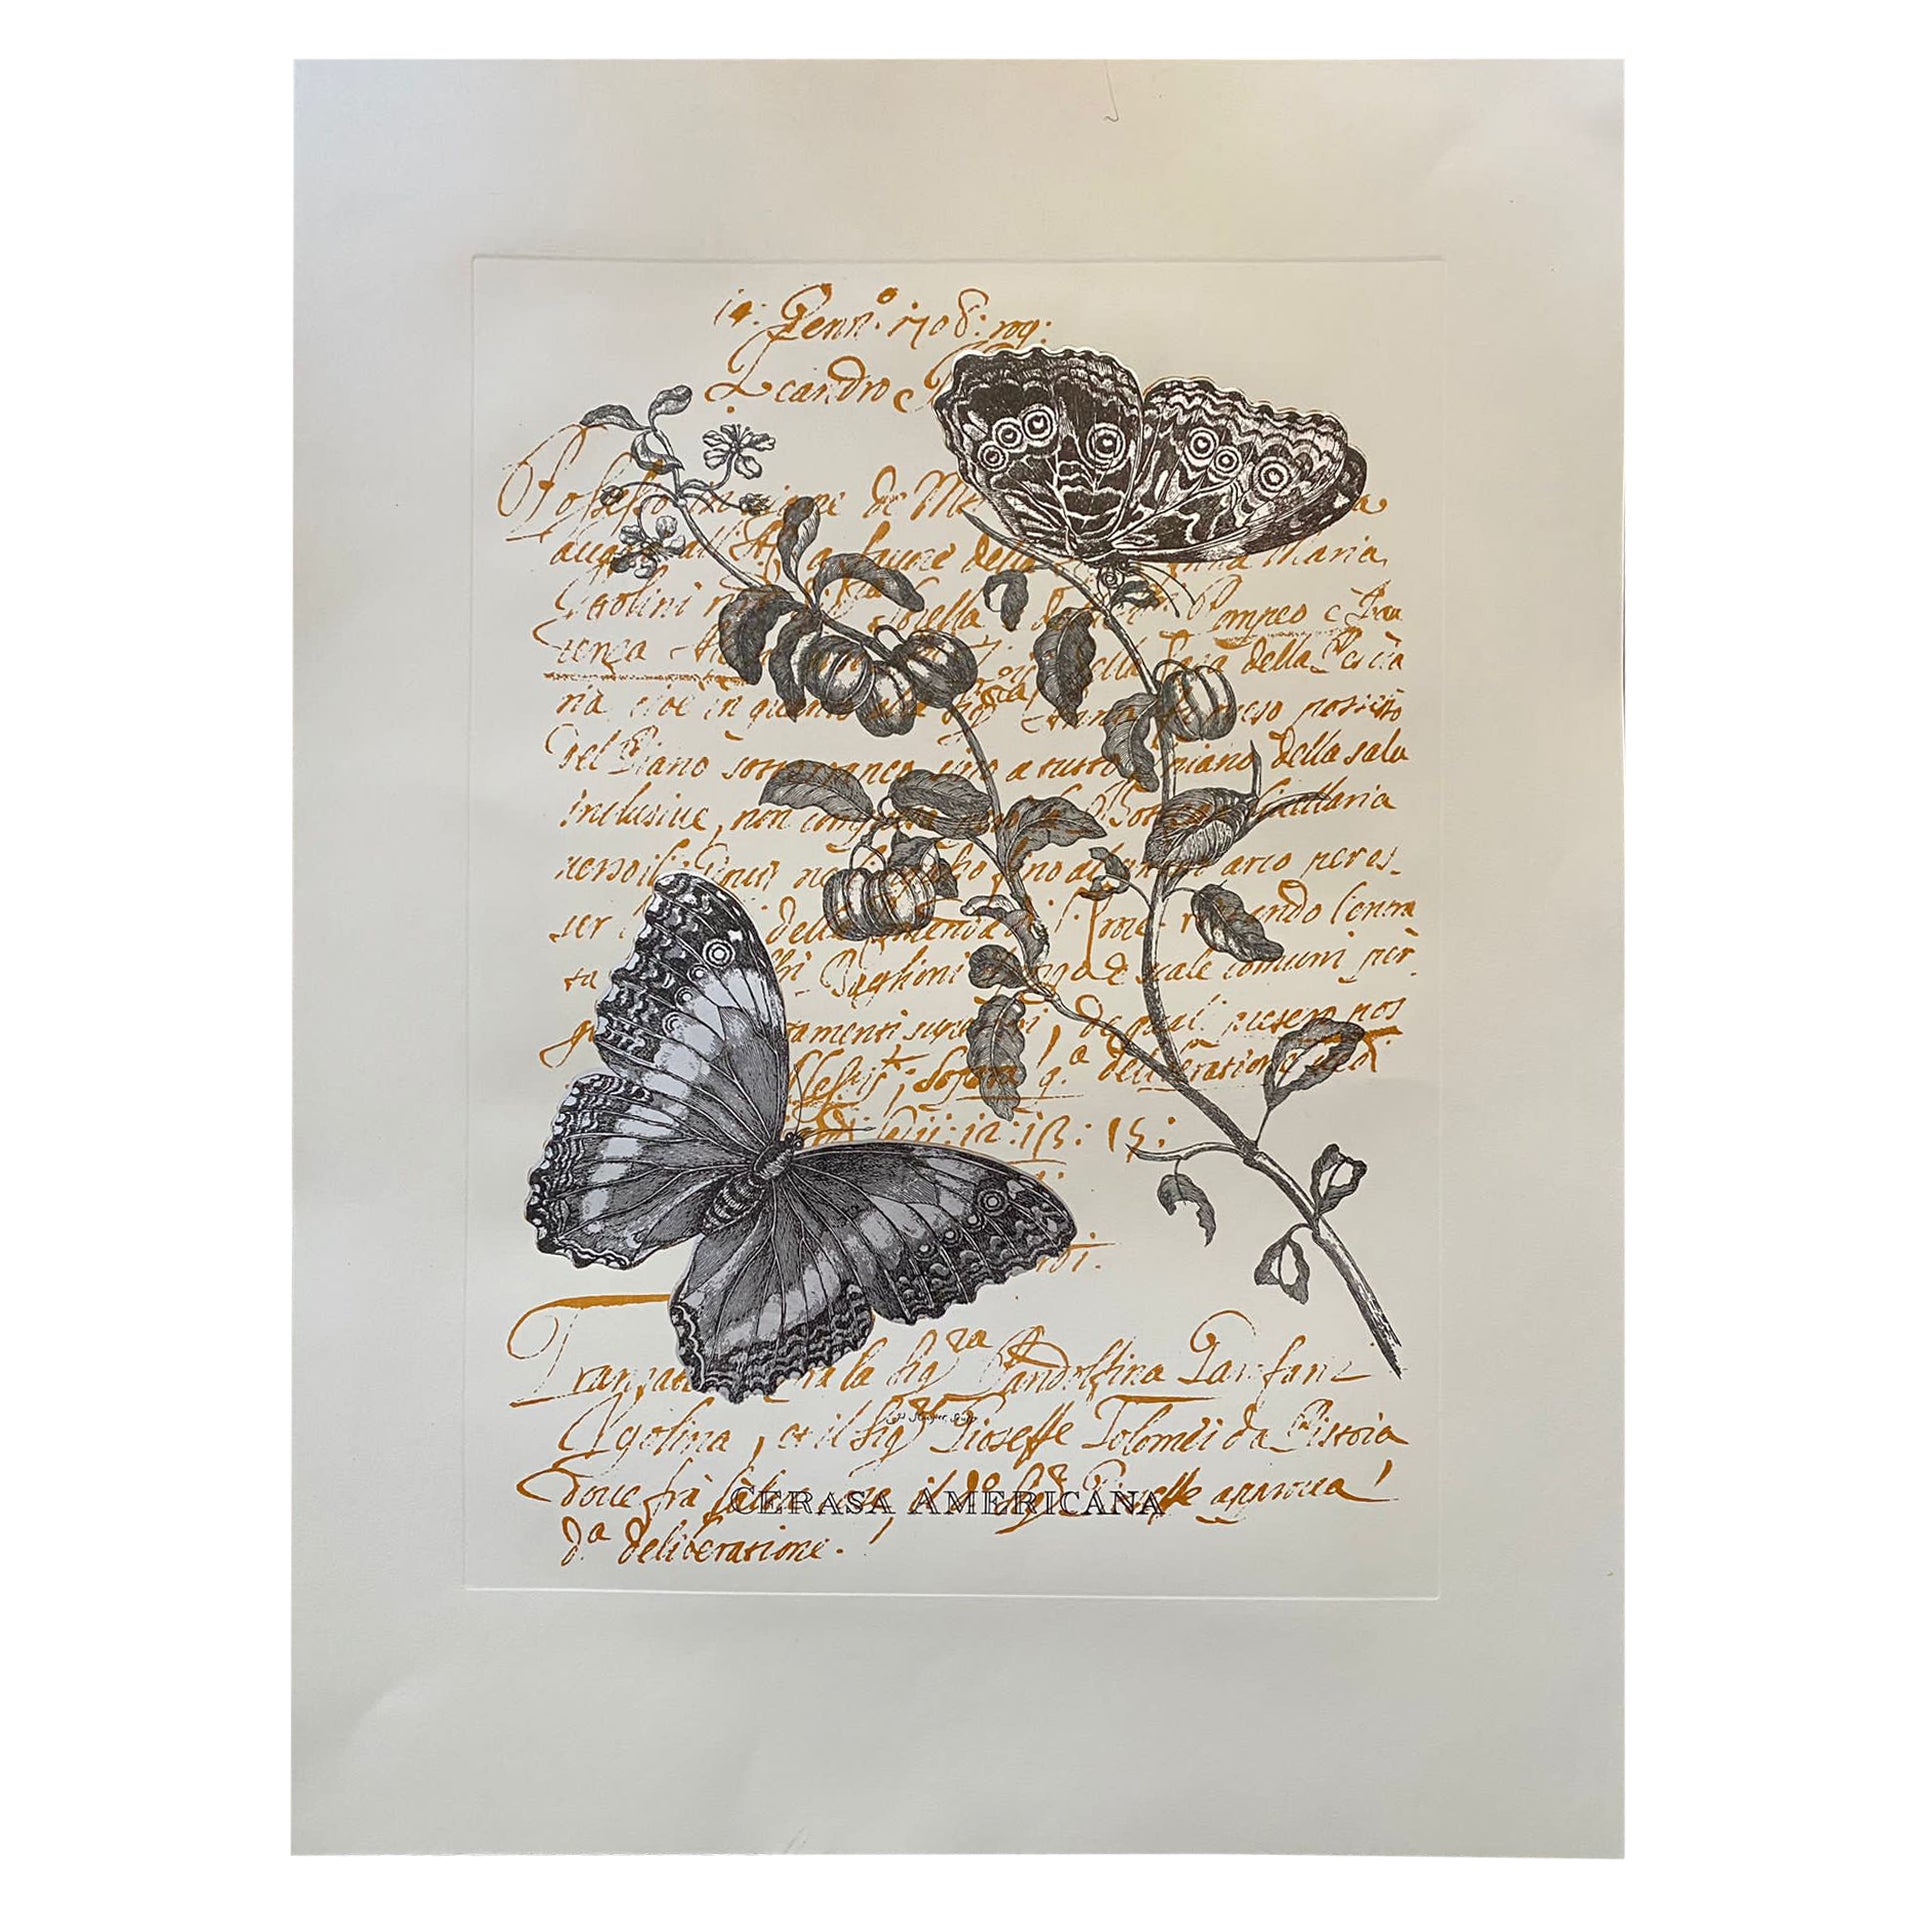 Contemporary Italian "Butterfly" Print Press Engraving Pure Silver Leaf, 1 of 2